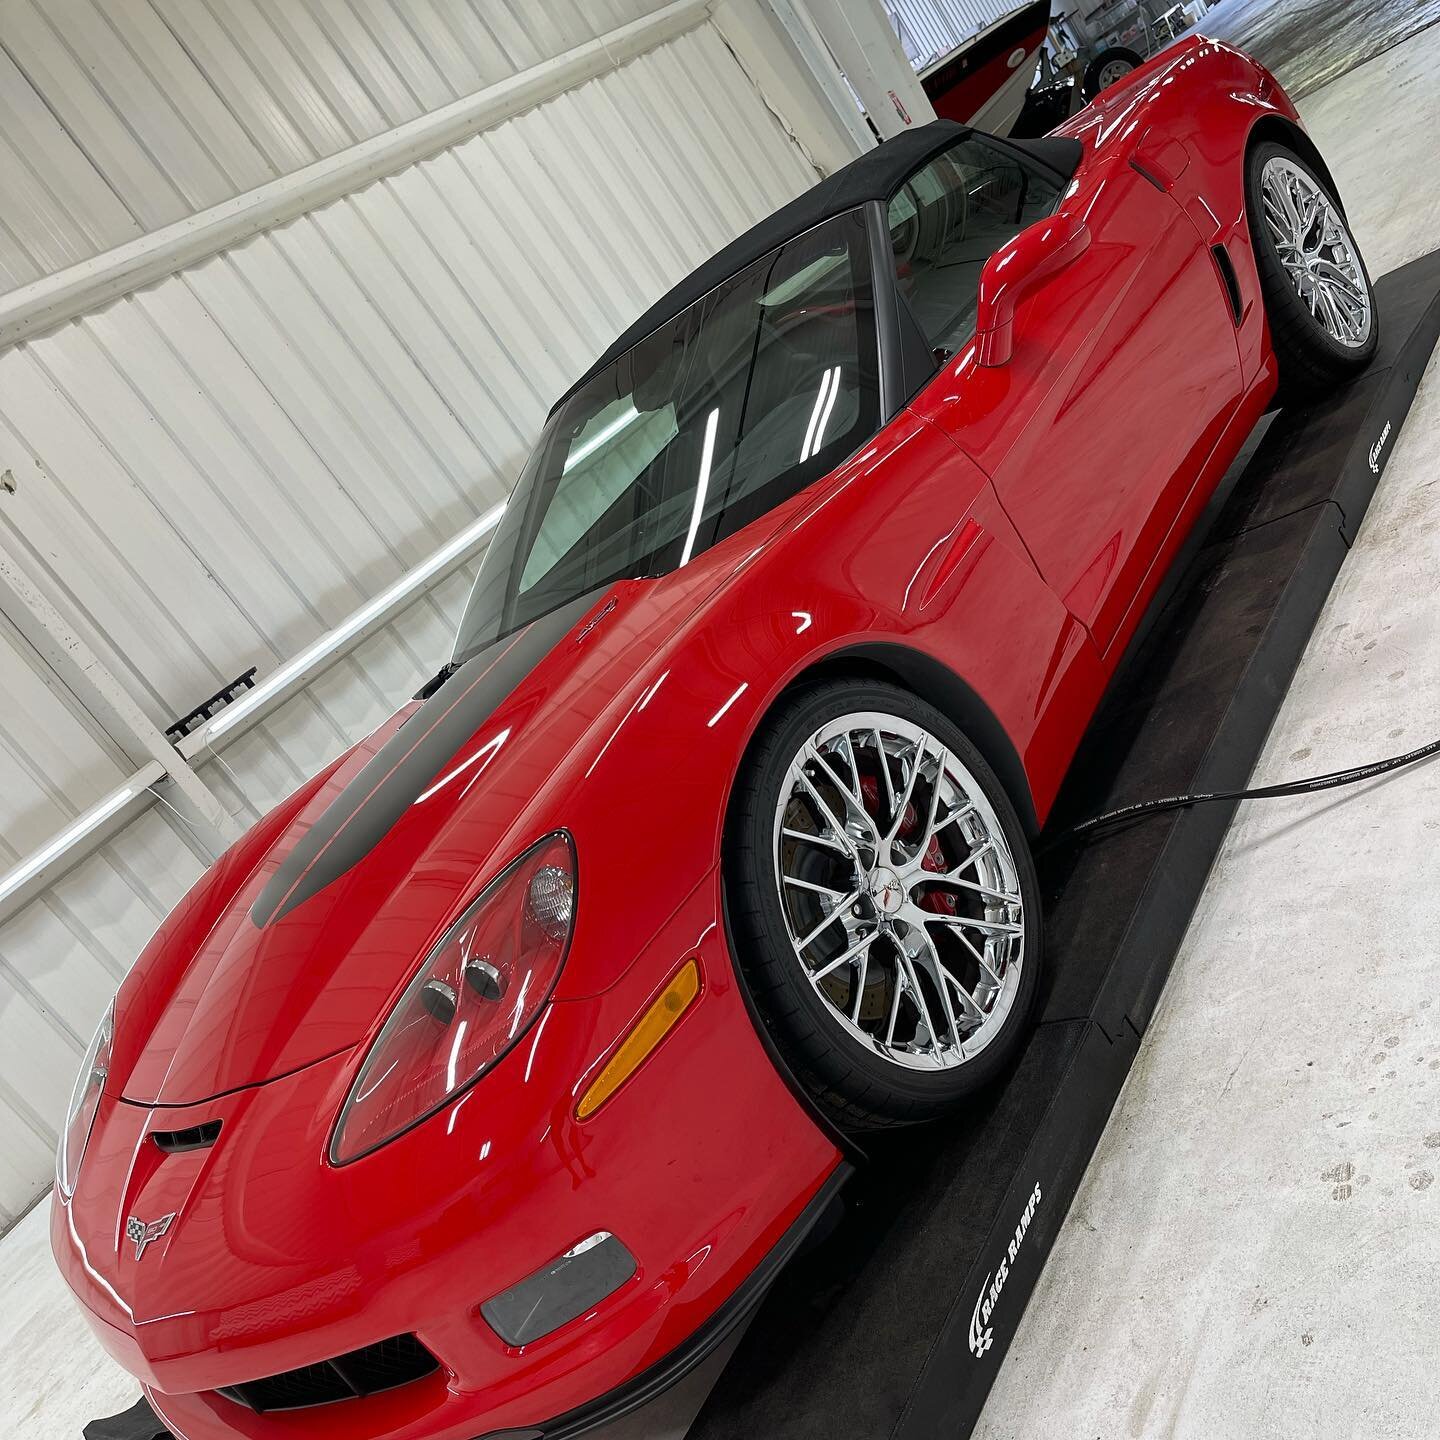 60TH Anniversary C6 Corvette in for Gtechniq Crystal Serum Ultra and tons more of Gtechniq goodies for ease of maintenance which means more time on the road. #westmichigan #spirnglake #grandhaven #grandrapids #detail #details #detailers #detailersofi